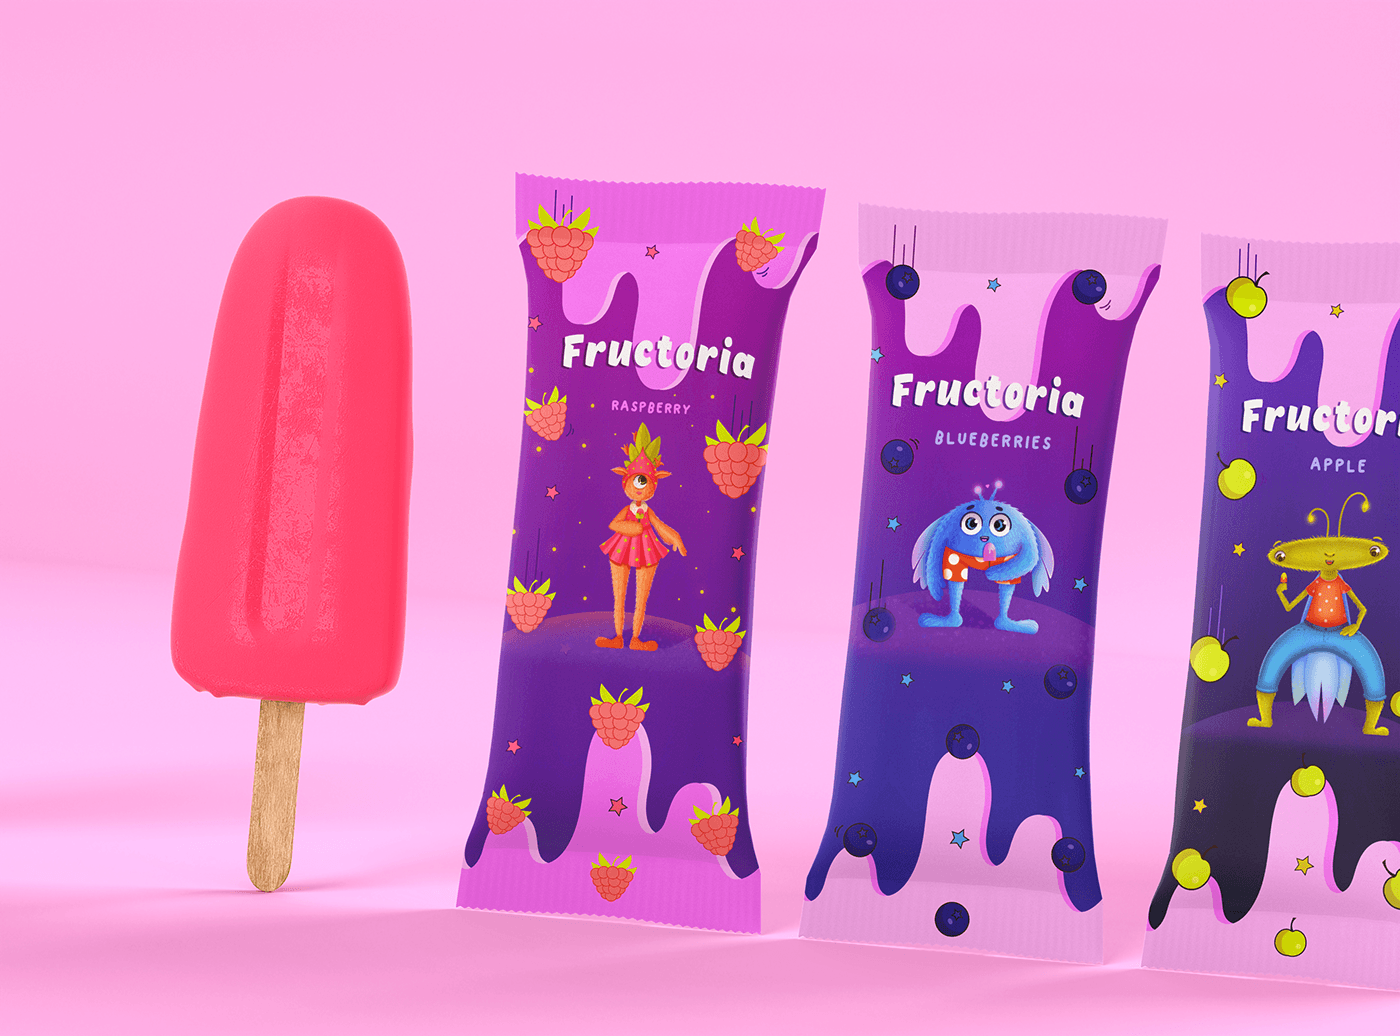 characters brand identity visual ice cream Packaging product design  Advertising  visual identity brand packaging design